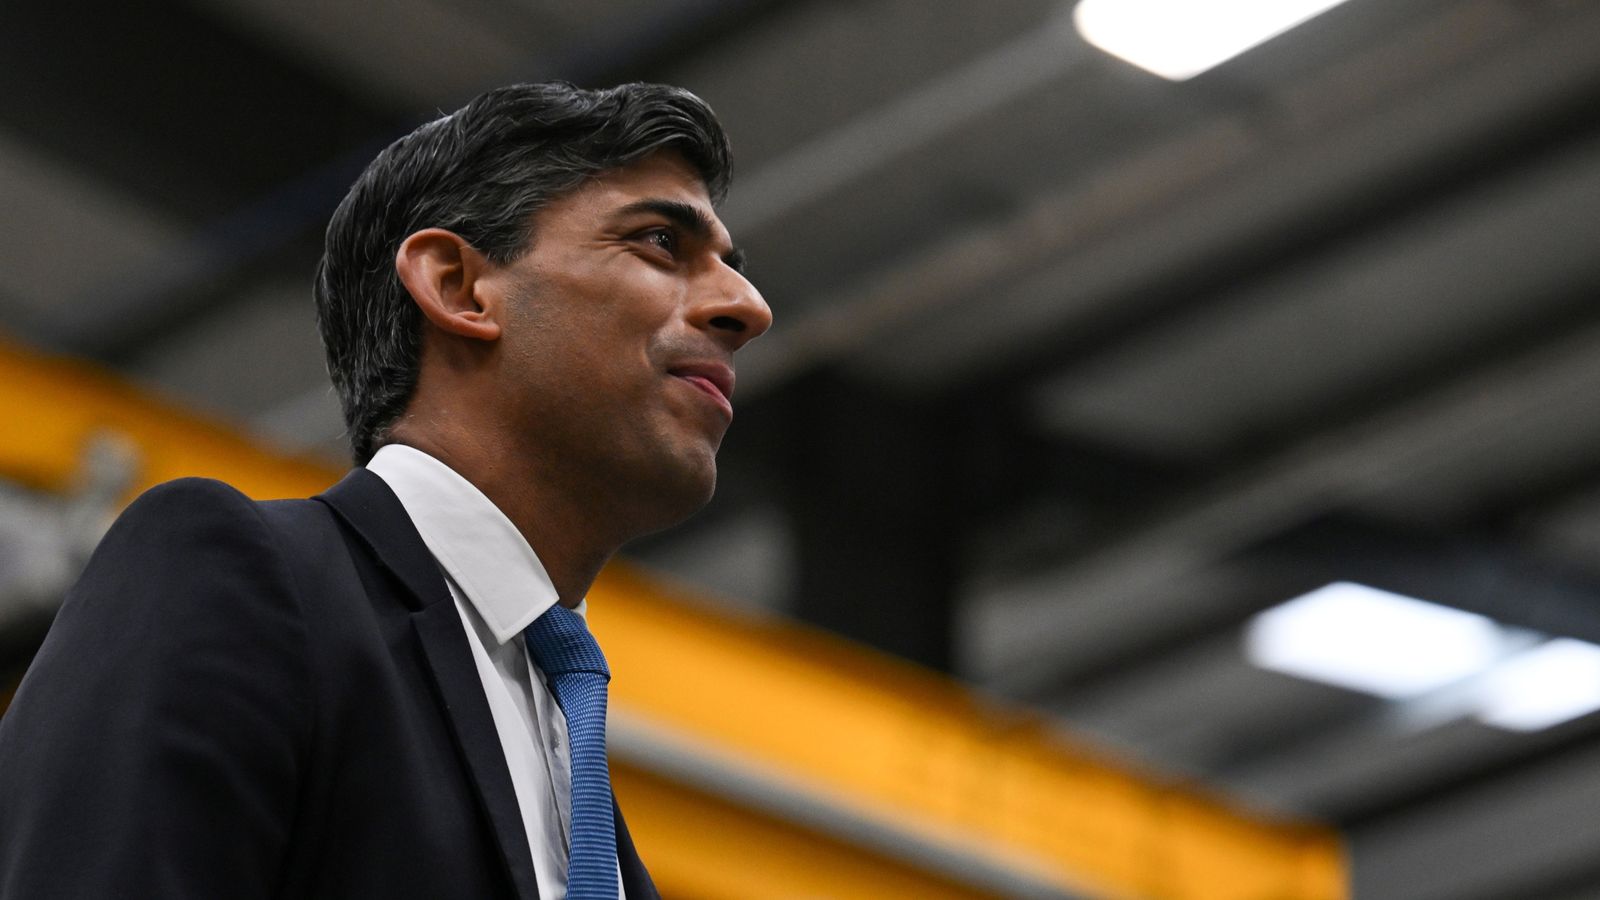 Rishi Sunak struggling to keep up voter coalition that delivered 2019 victory, in accordance with Sky News voter panel